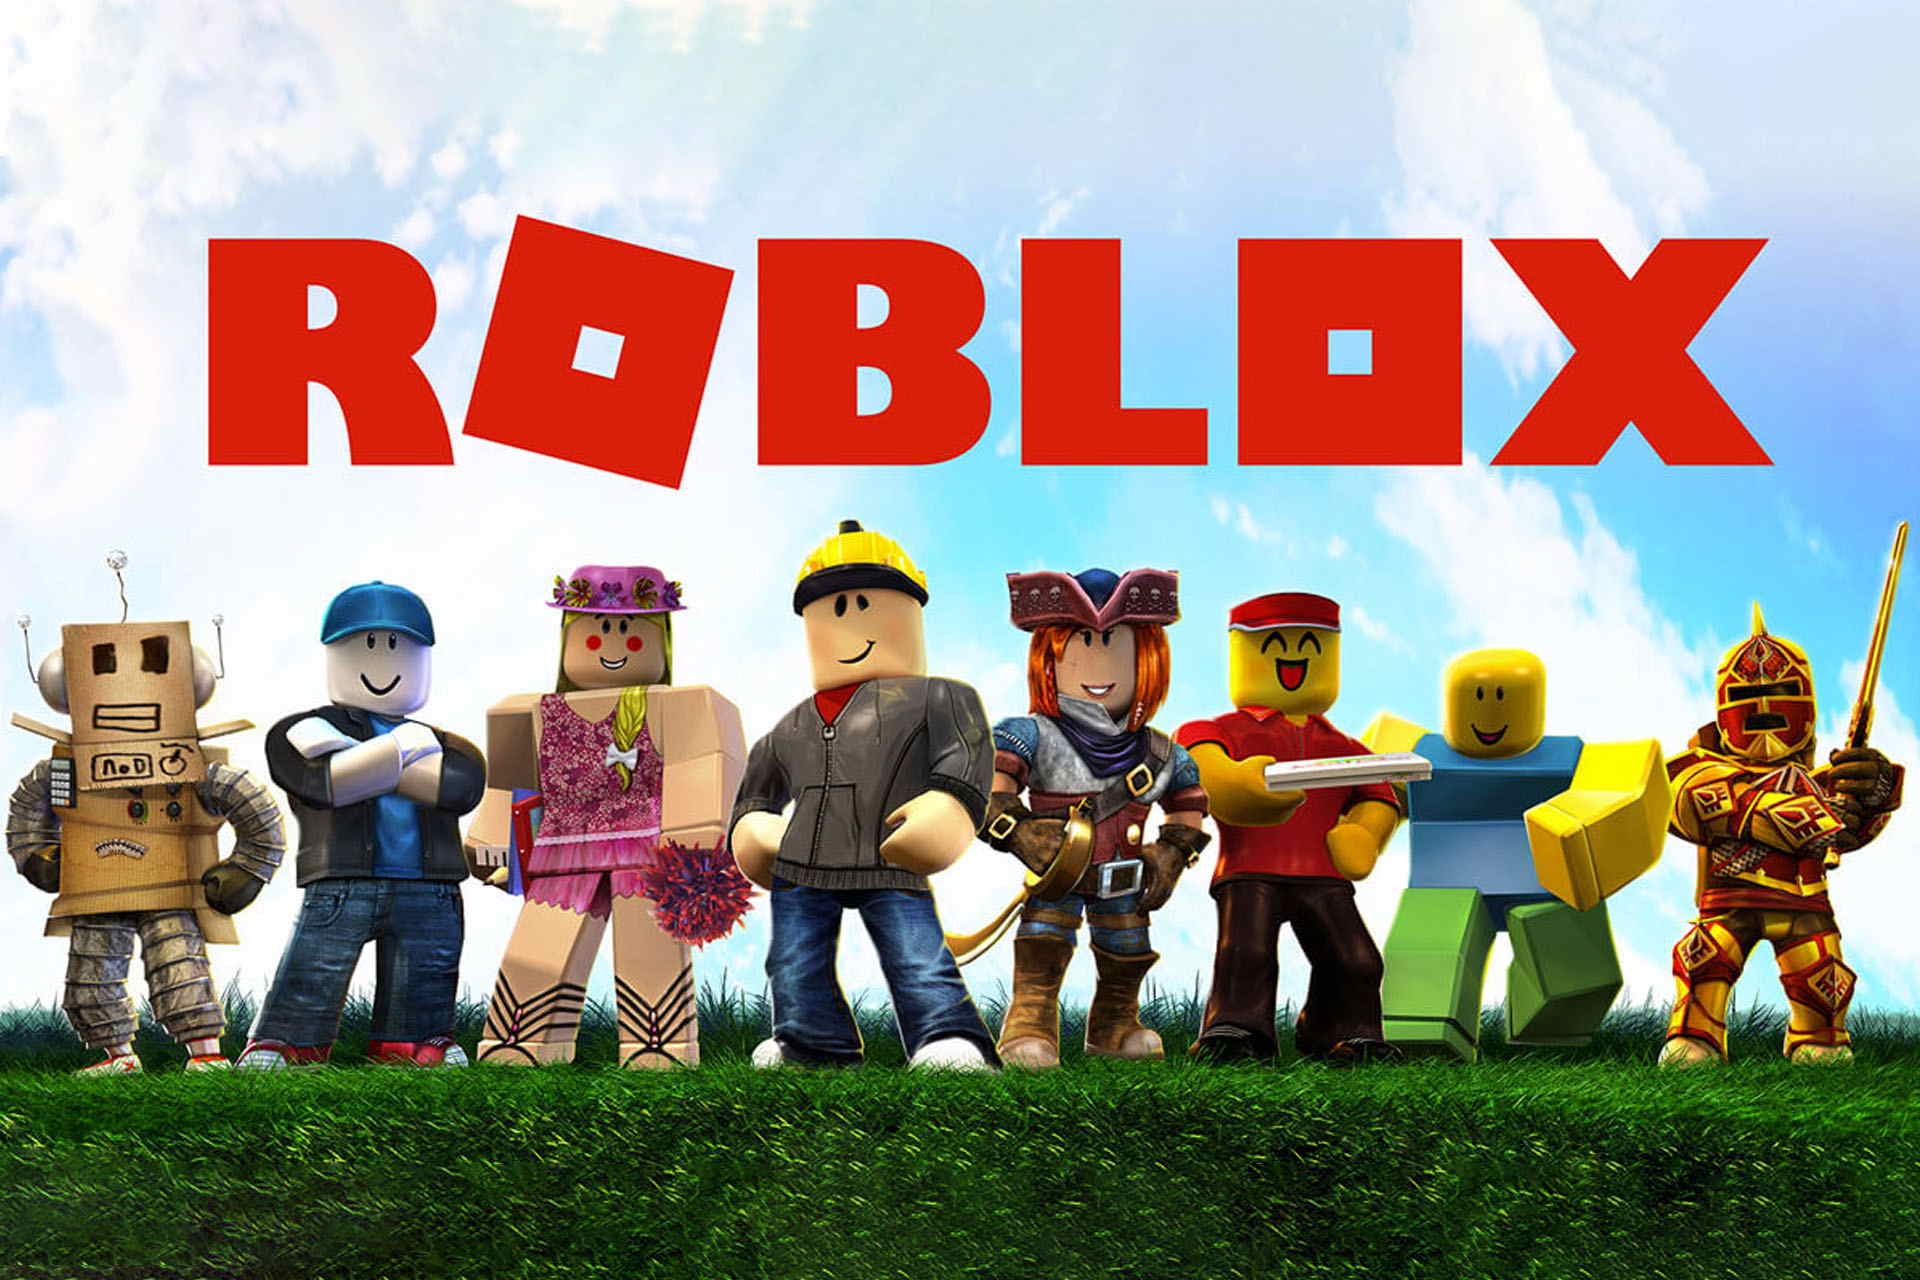 Roblox won't let you move? Here's what to do